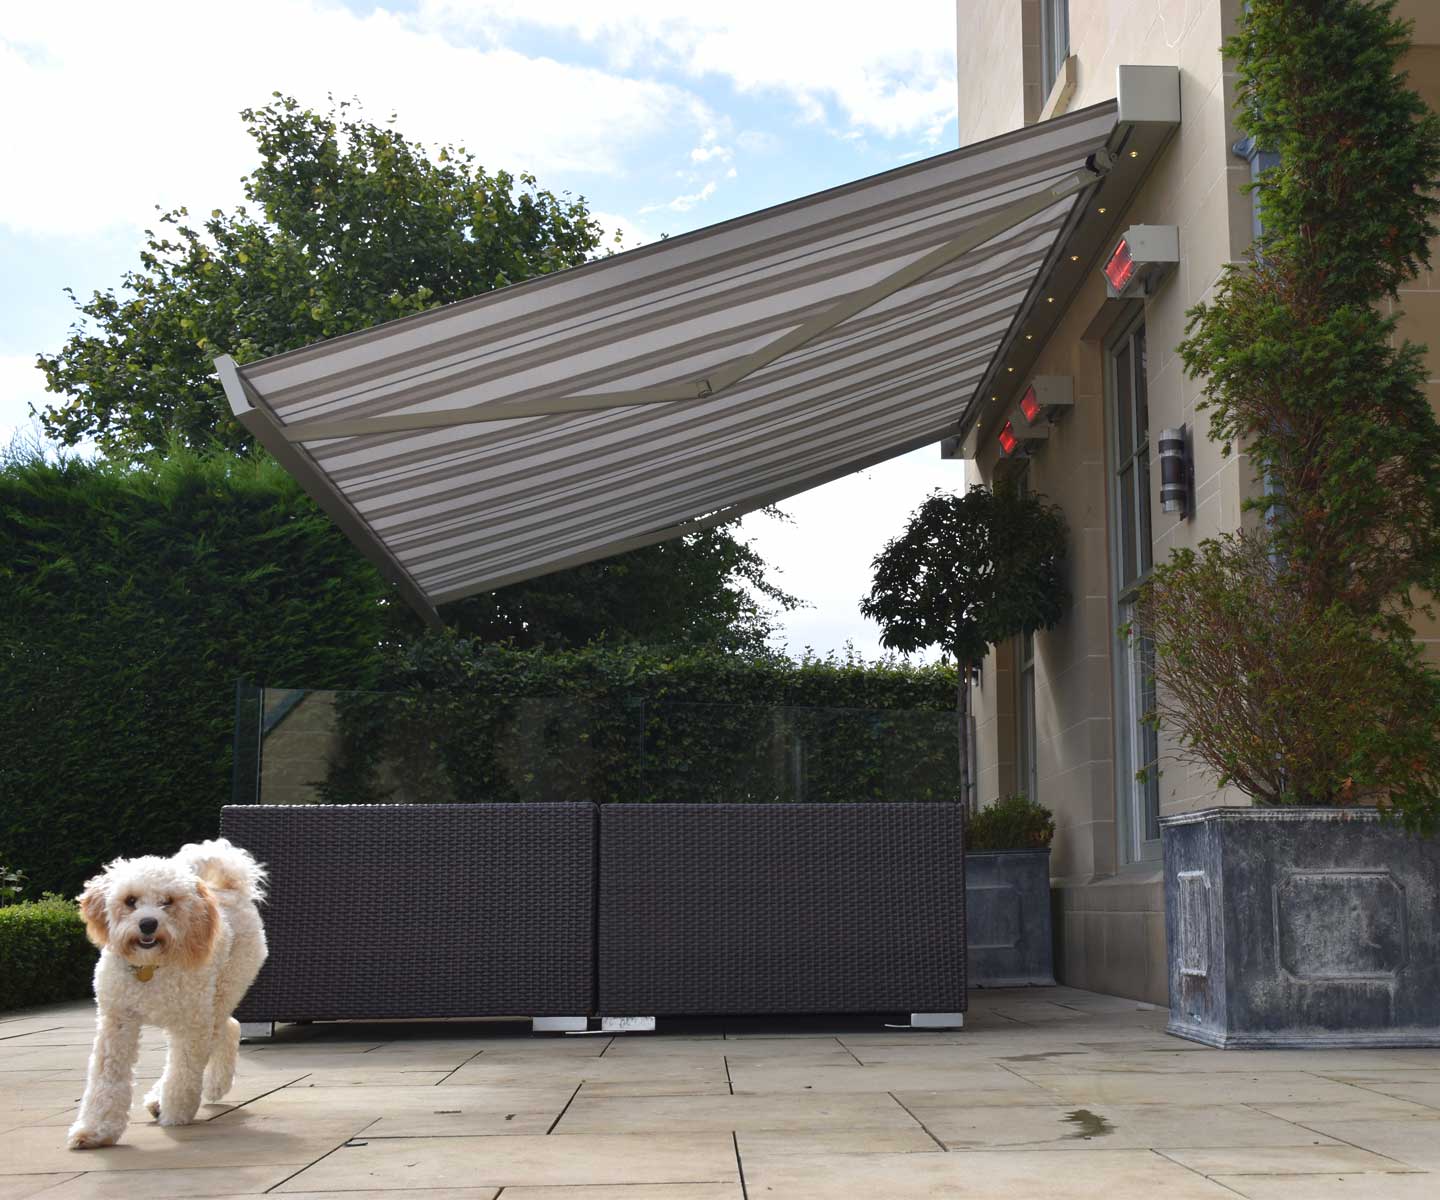 Awning with dog under